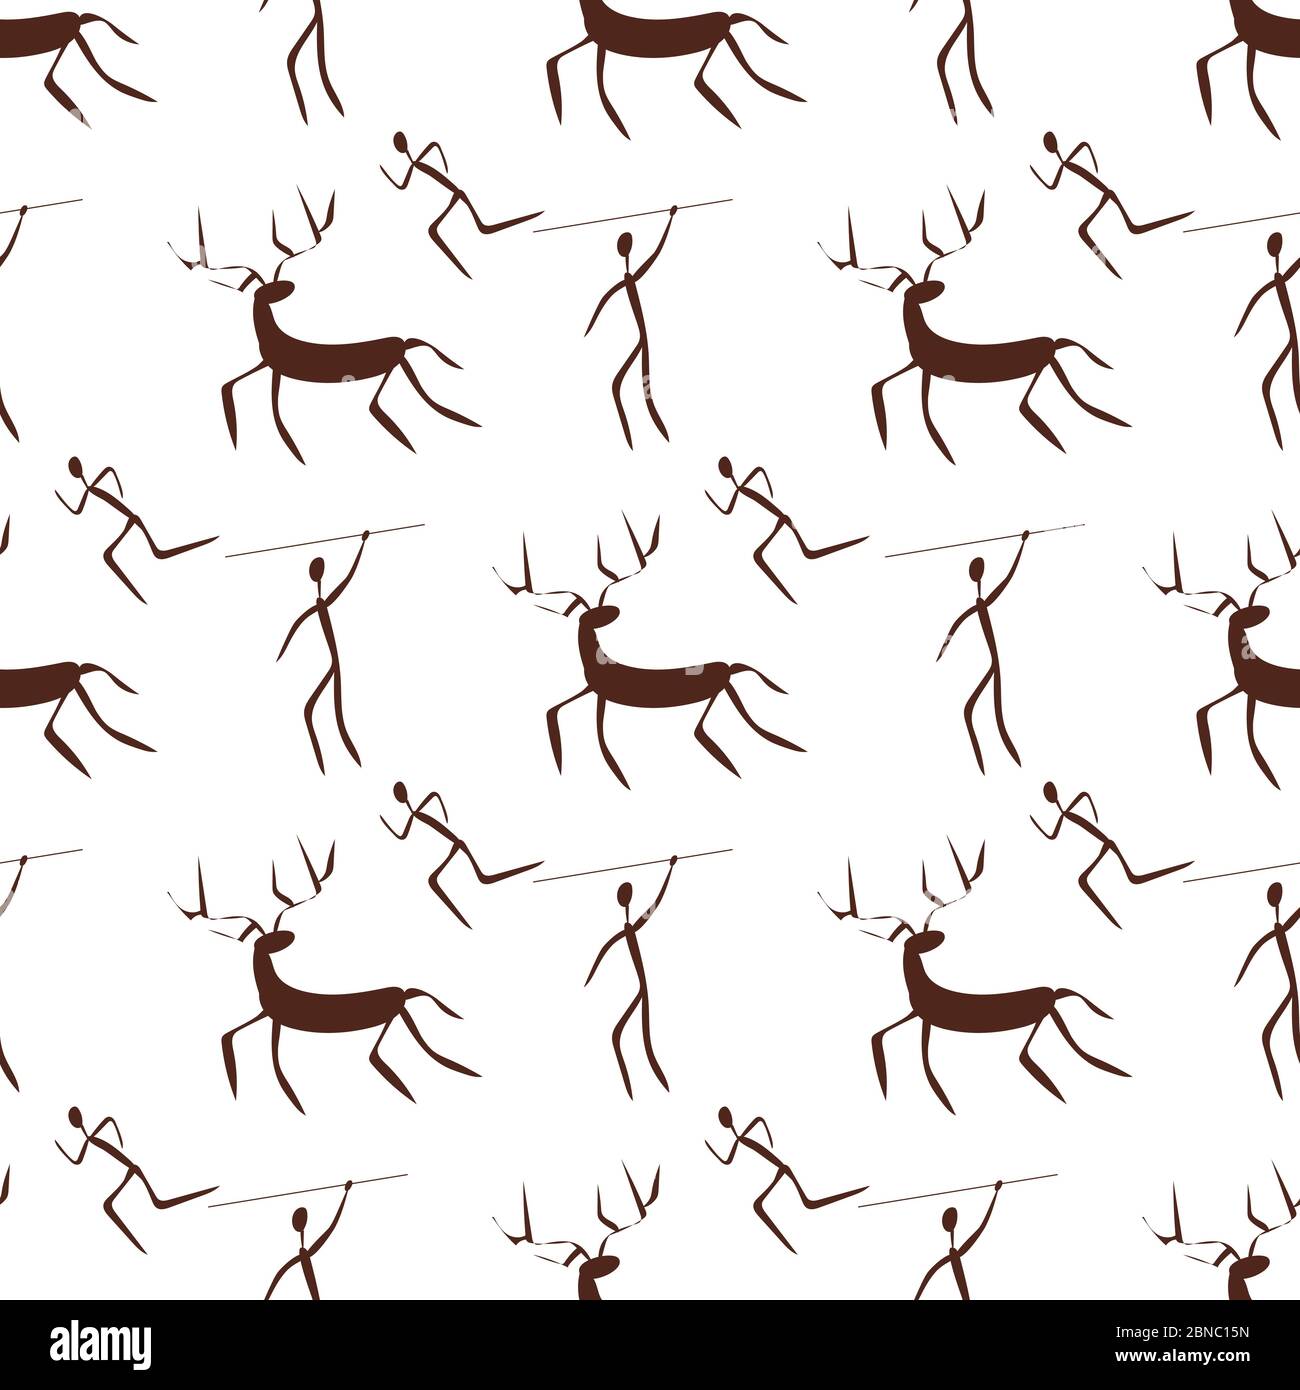 Stone age primitive painting seamless pattern background man and deer. Vector illustration Stock Vector